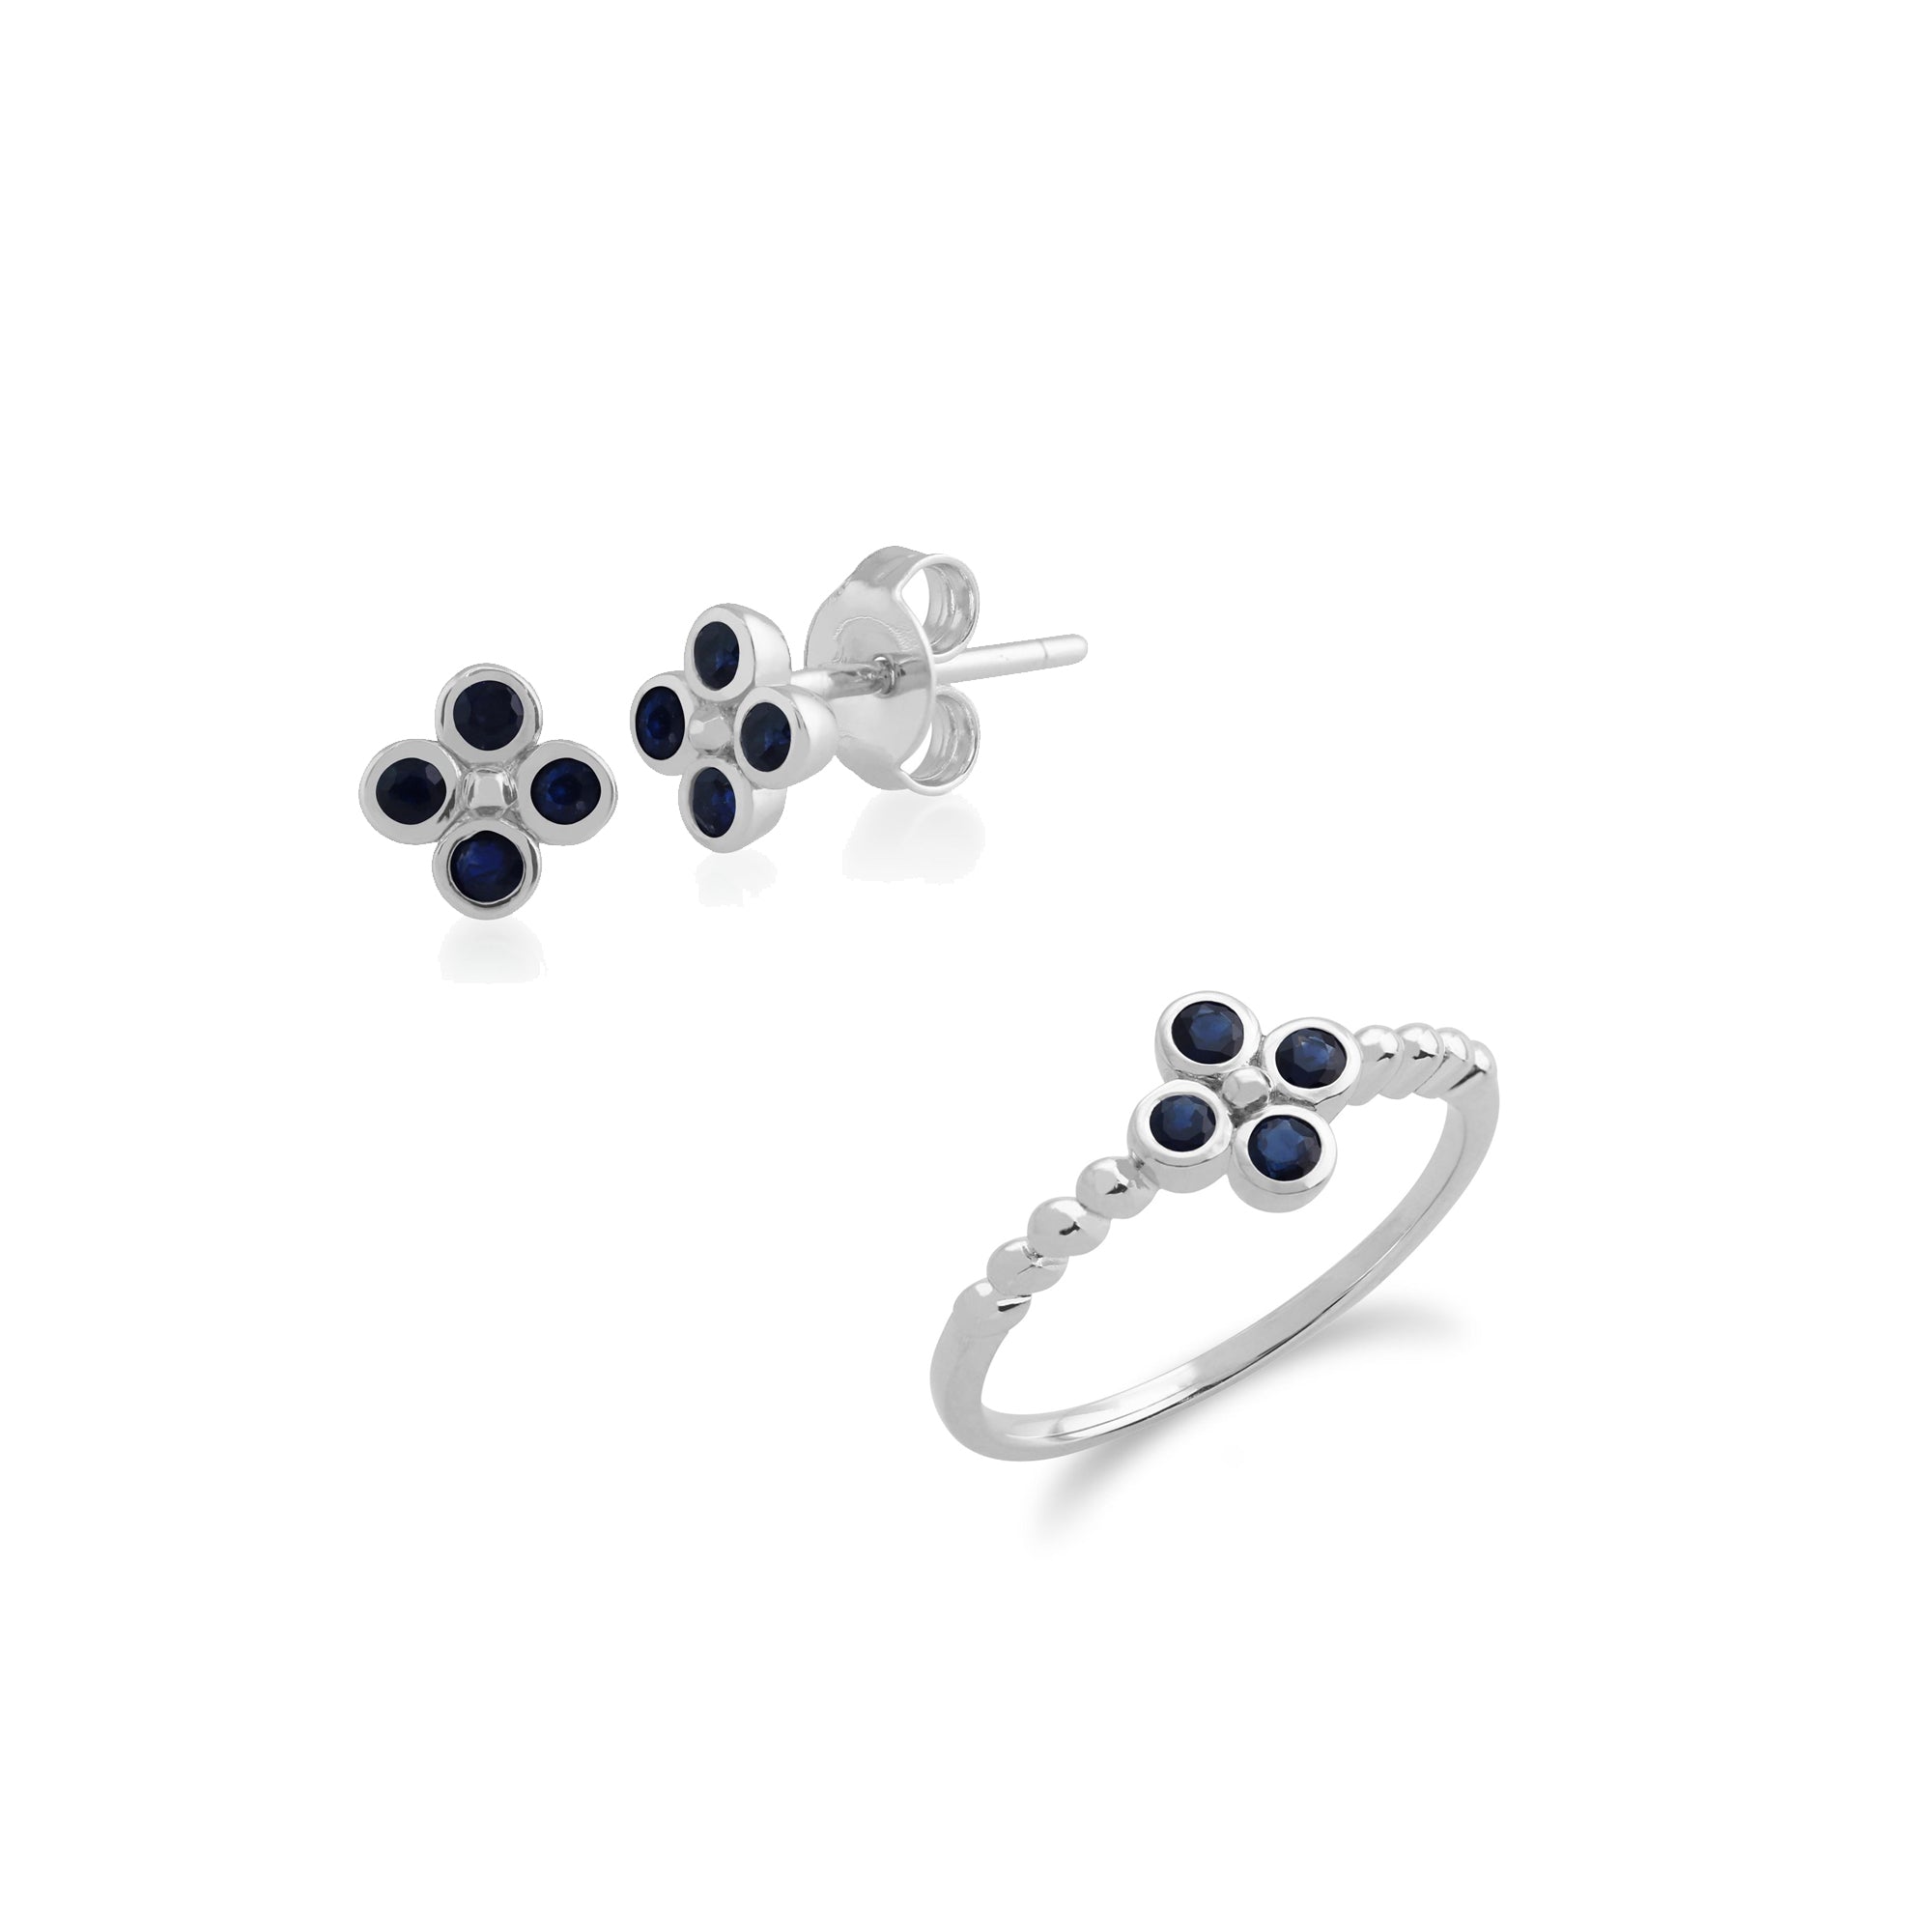 Floral Round Sapphire Clover Stud Earrings & Ring Set in 925 Sterling Silver - Gemondo